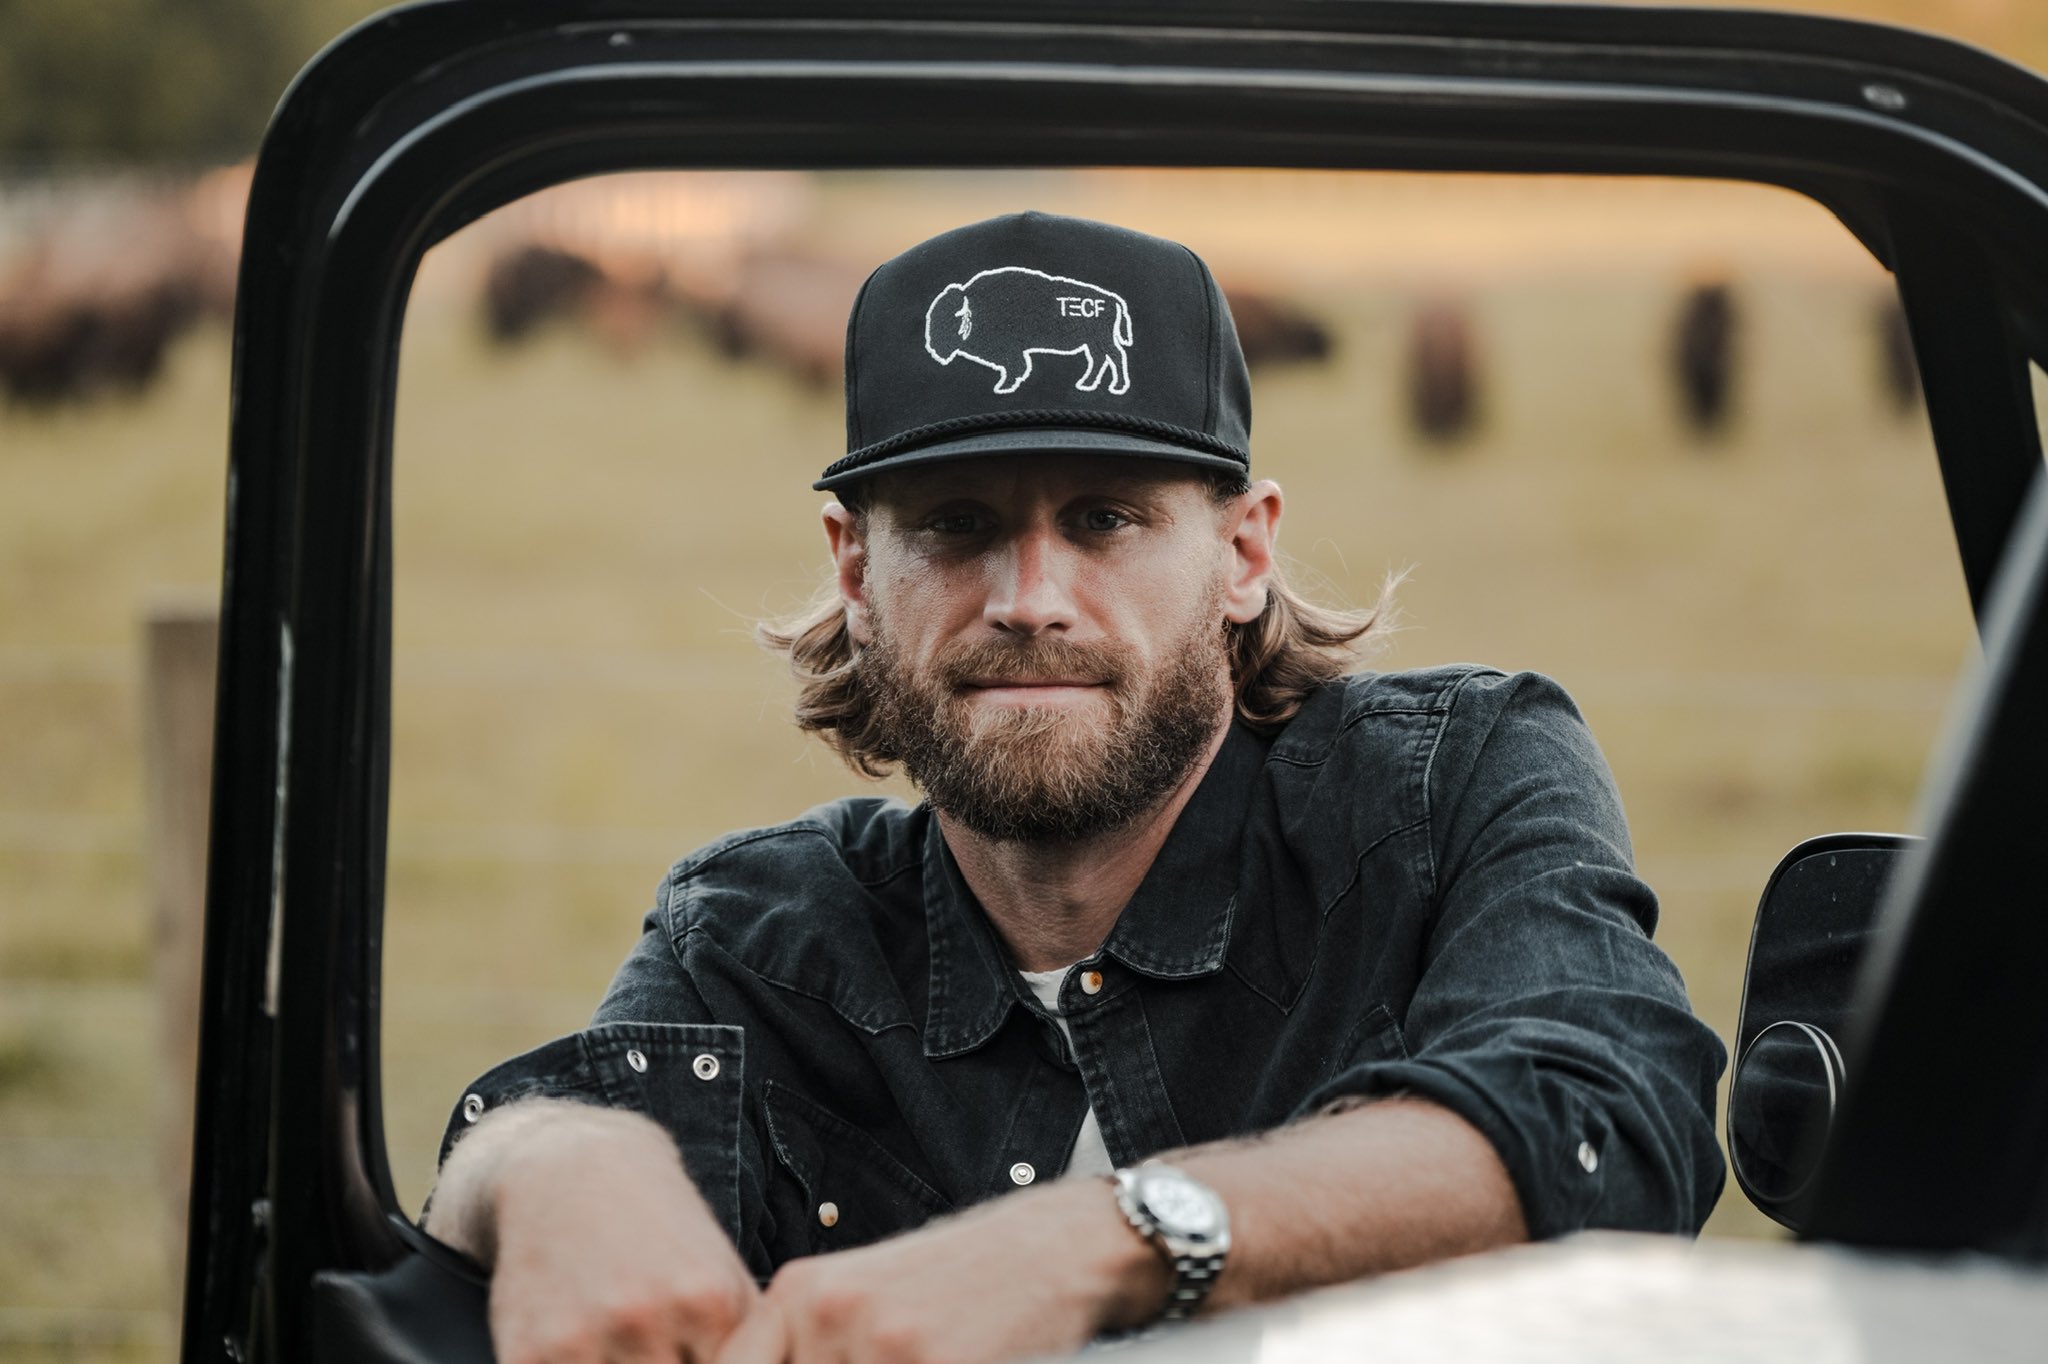 New Music Friday: Chase Rice Releases “I Hate Cowboys,” Giving Fans a Glimpse into his Upcoming Album “I Hate Cowboys & All Dogs Go To Hell”